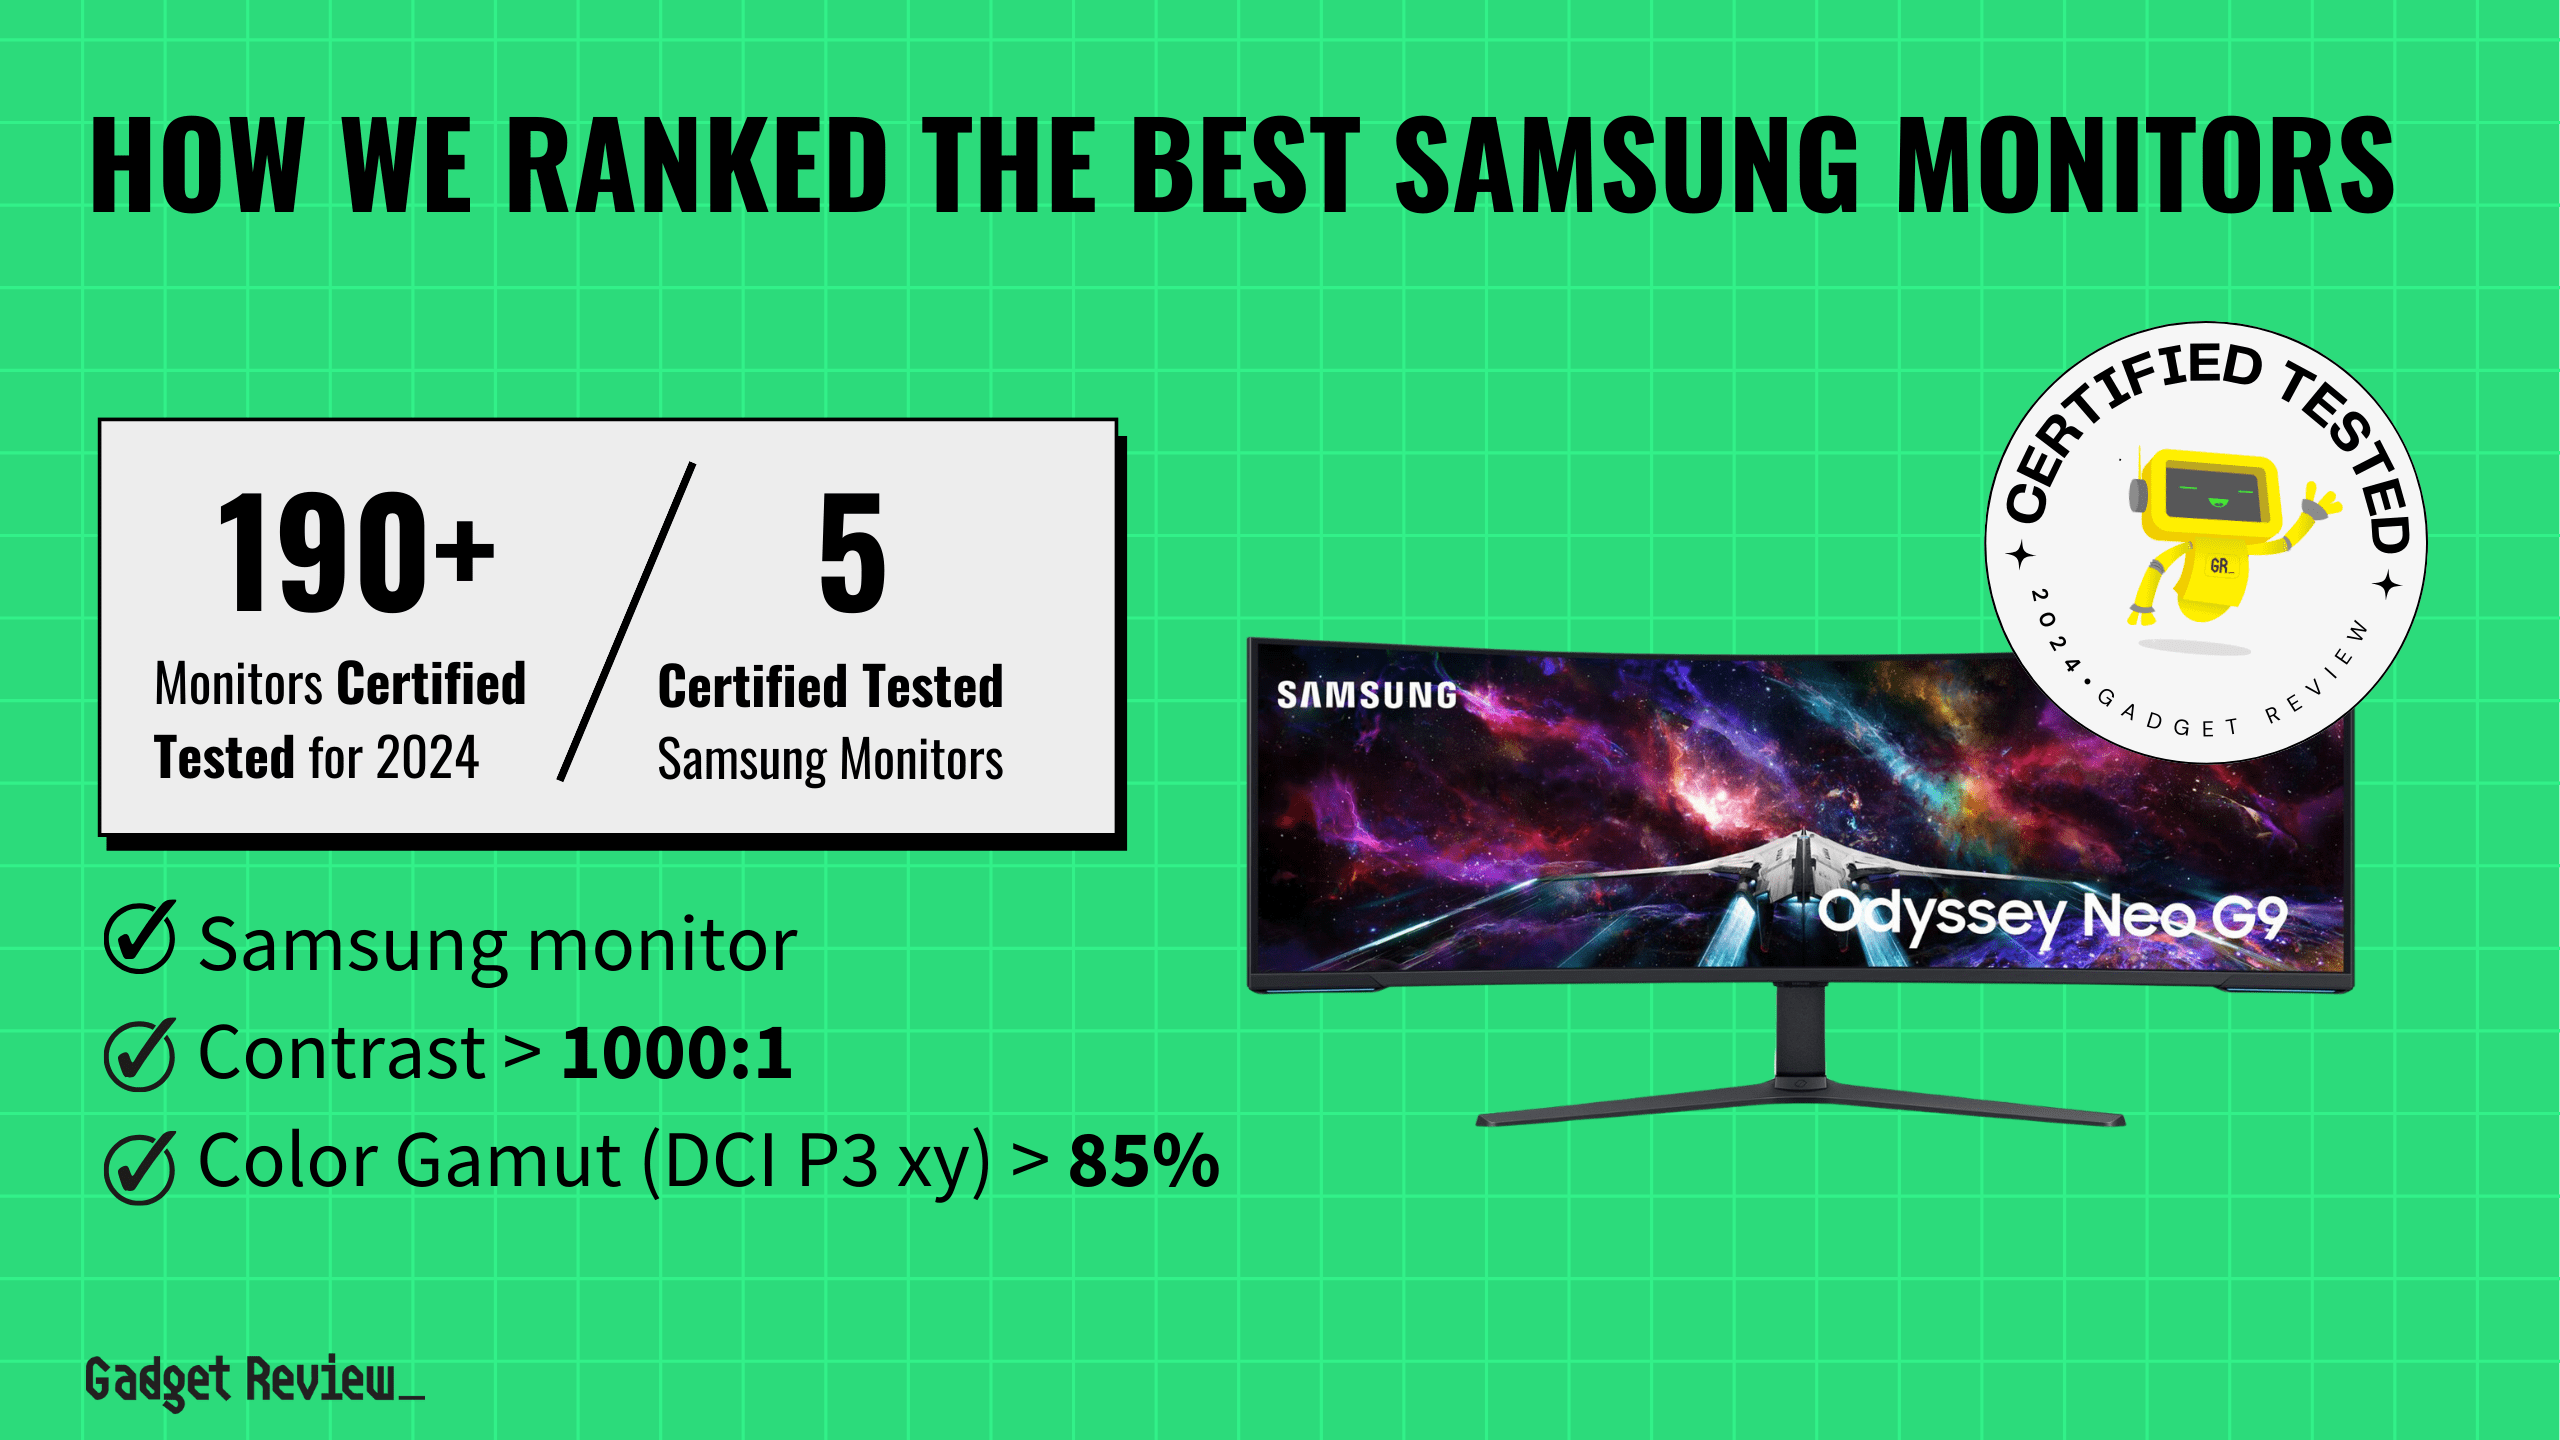 best samsung monitor guide that shows the top best computer monitor model